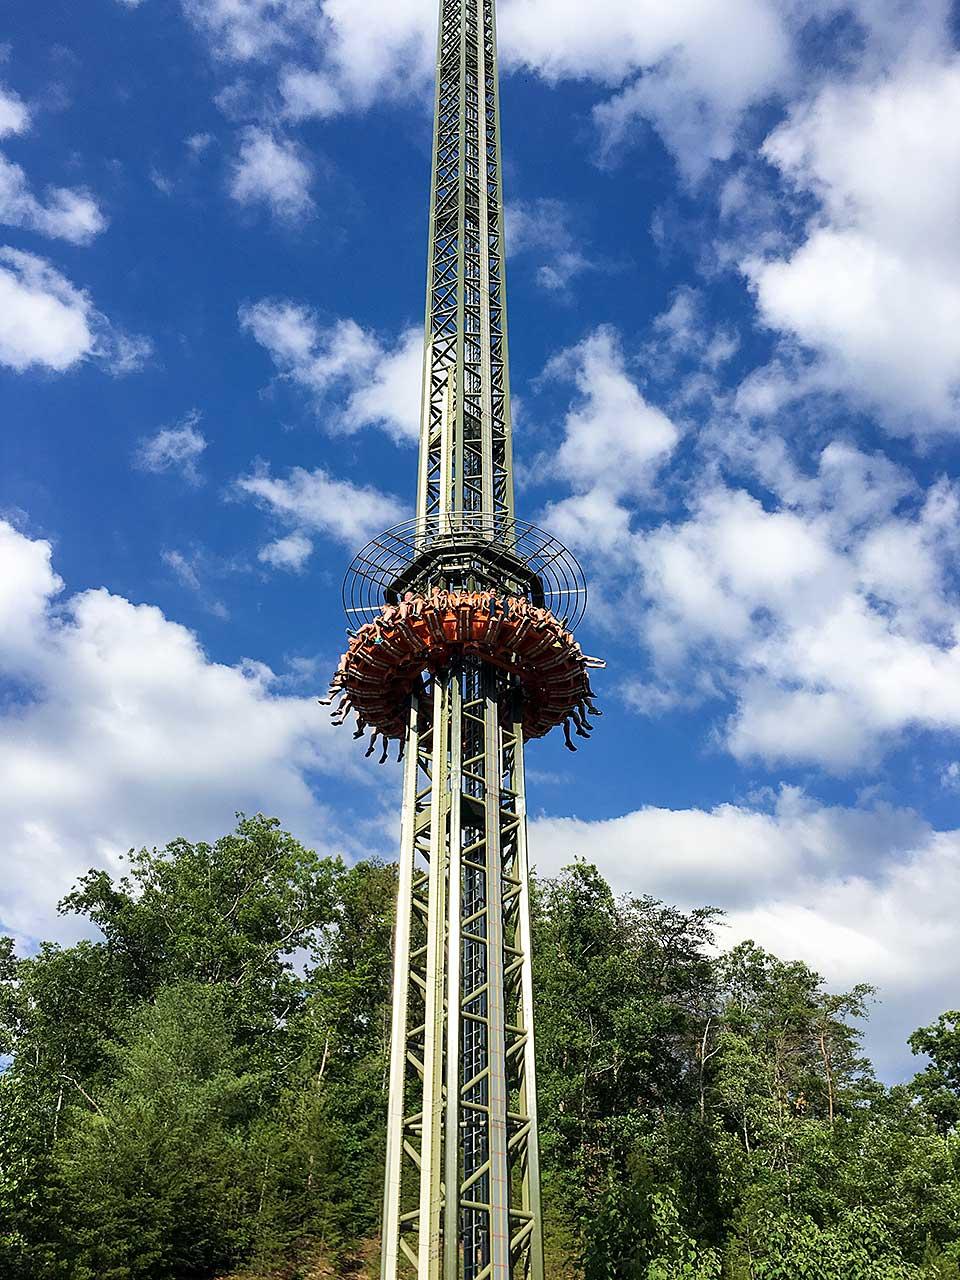 Drop Line at Dollywood is big on views and stomach-dropping thrills.